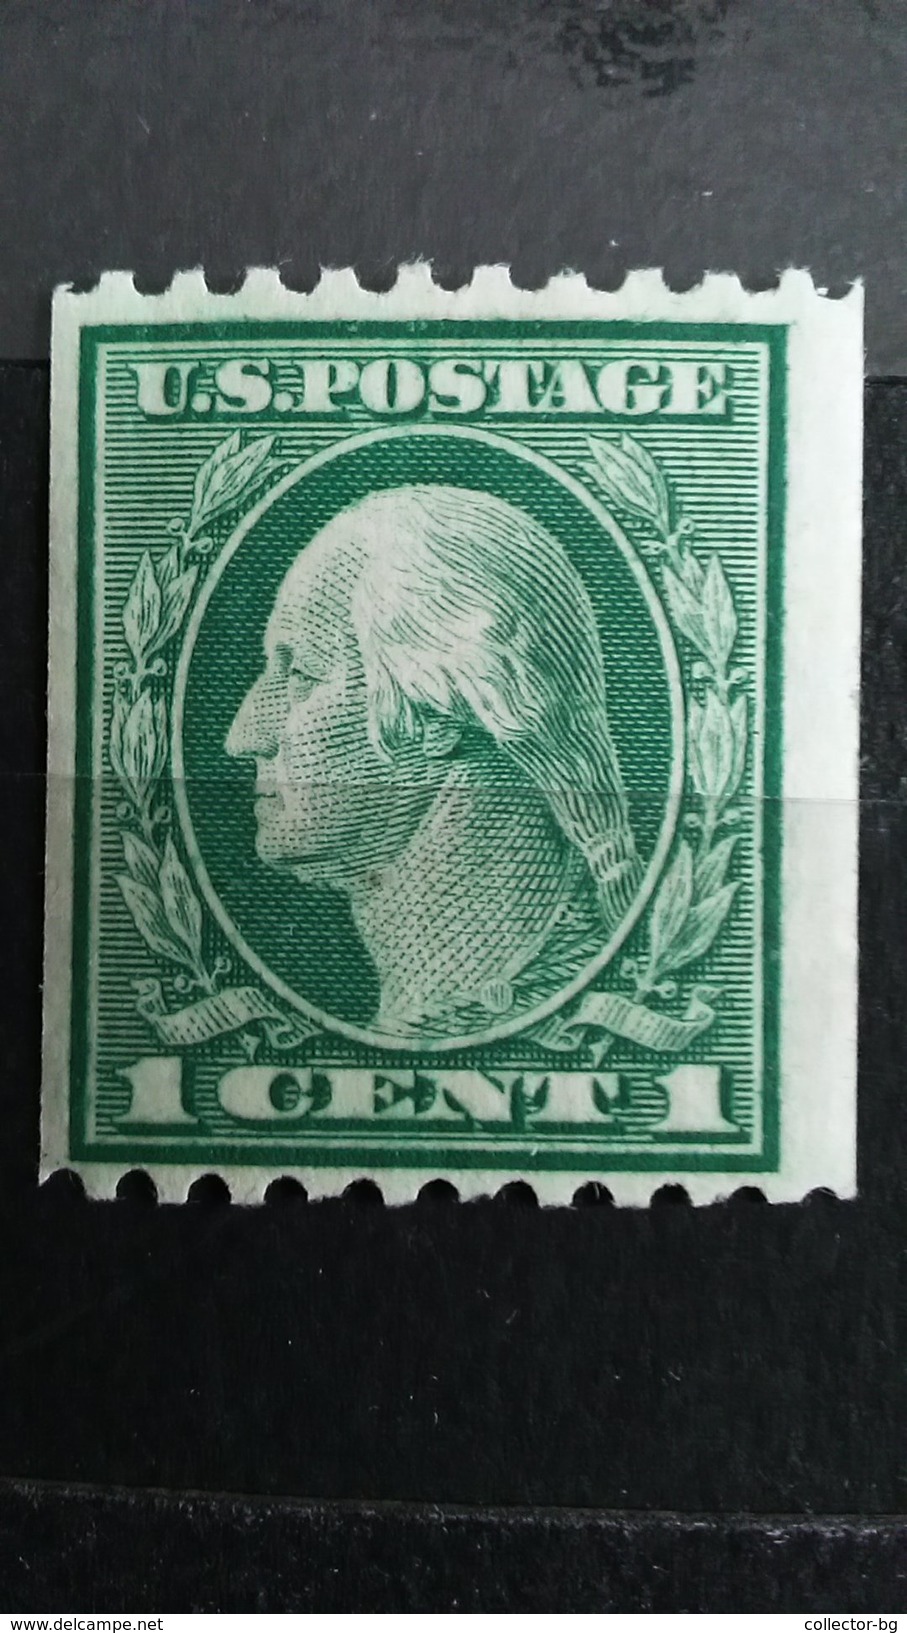 1 Cent US Postage Stamps for sale